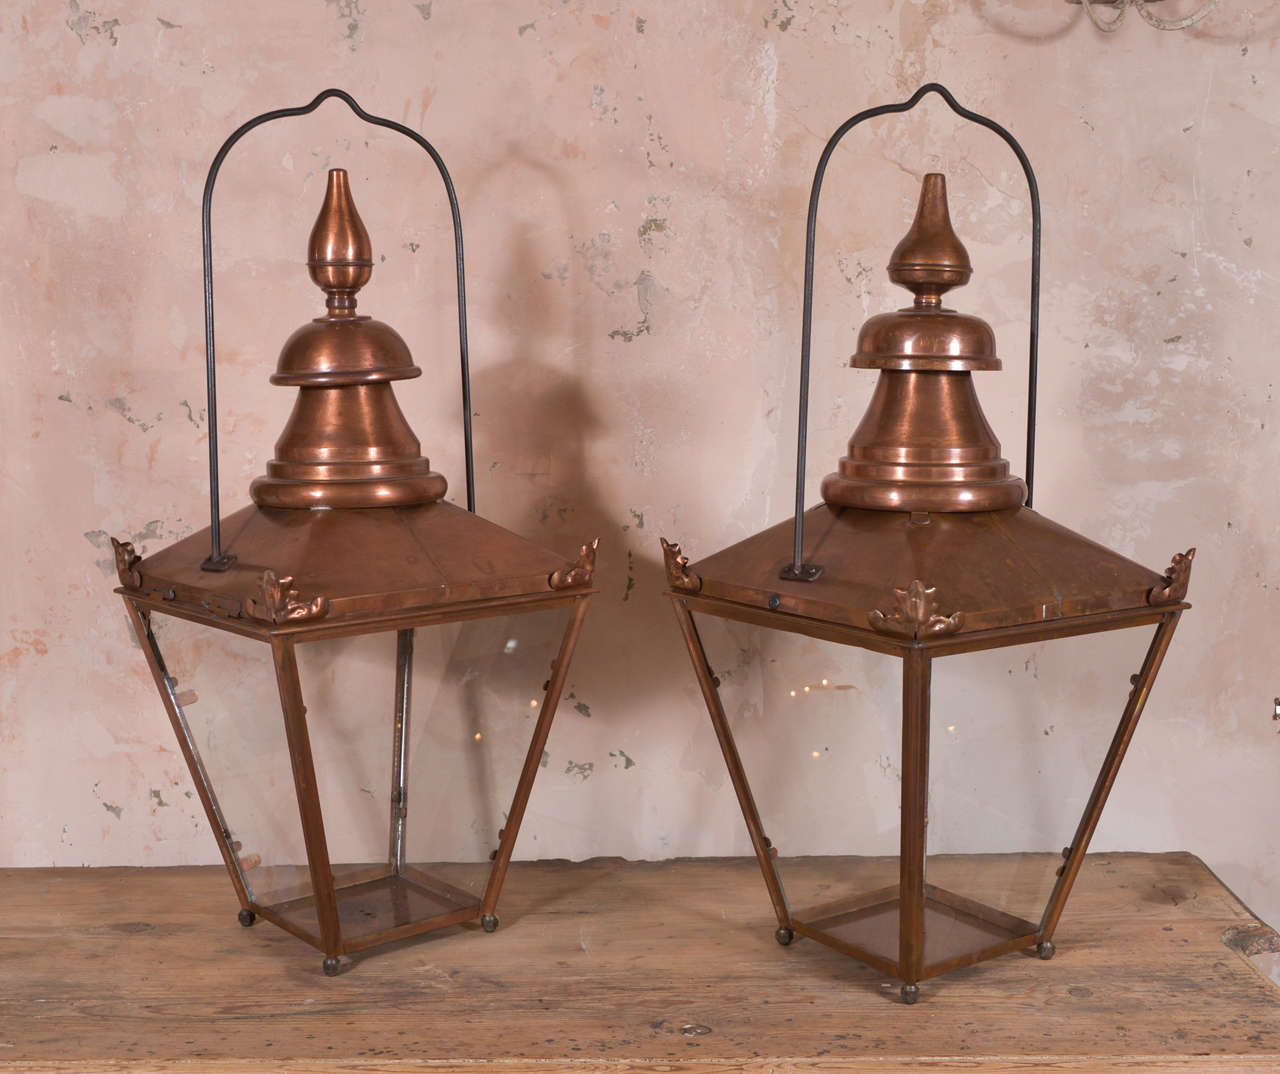 Two French copper lanterns that make a great near-pair (slightly different shaped tops). Lanterns date to the late 19th century. Priced at $3,900 each. Lanterns can be wired for electricity or fitted for use with gas for an additional cost.